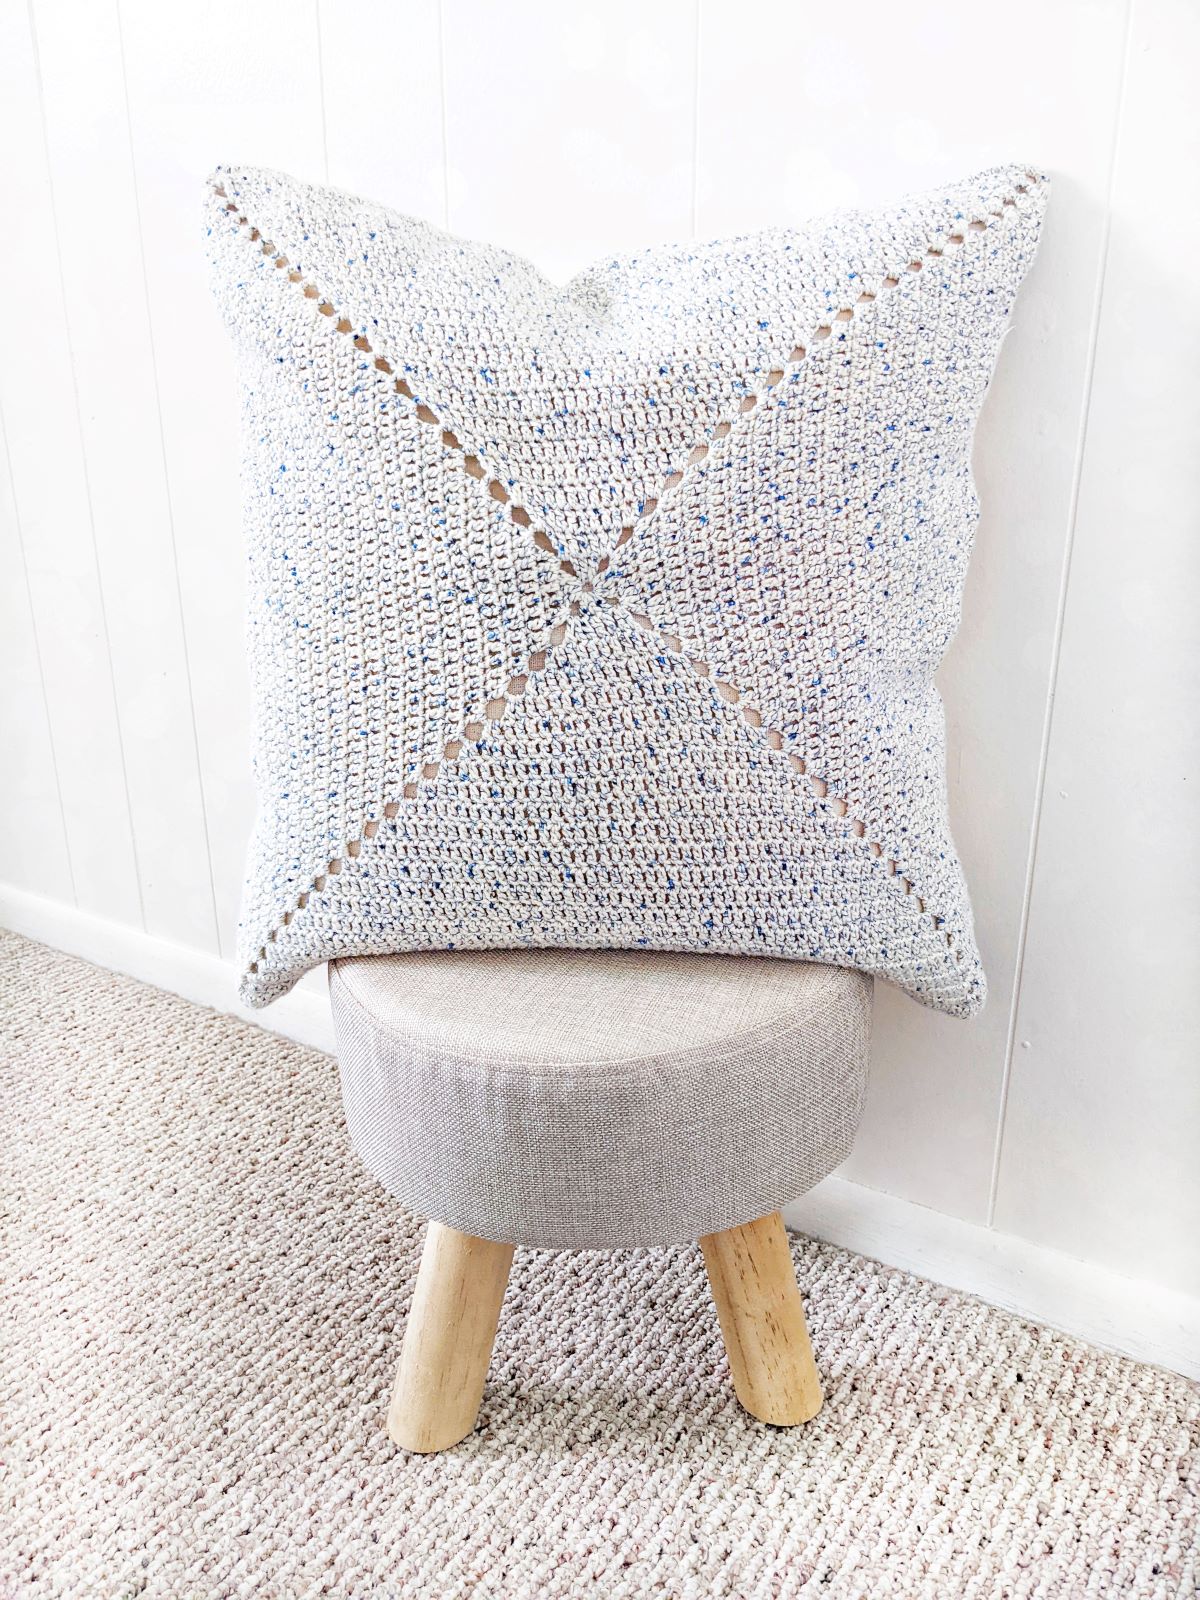 a cotton double crochet granny square cushion cover pillow on a mini wooden stool